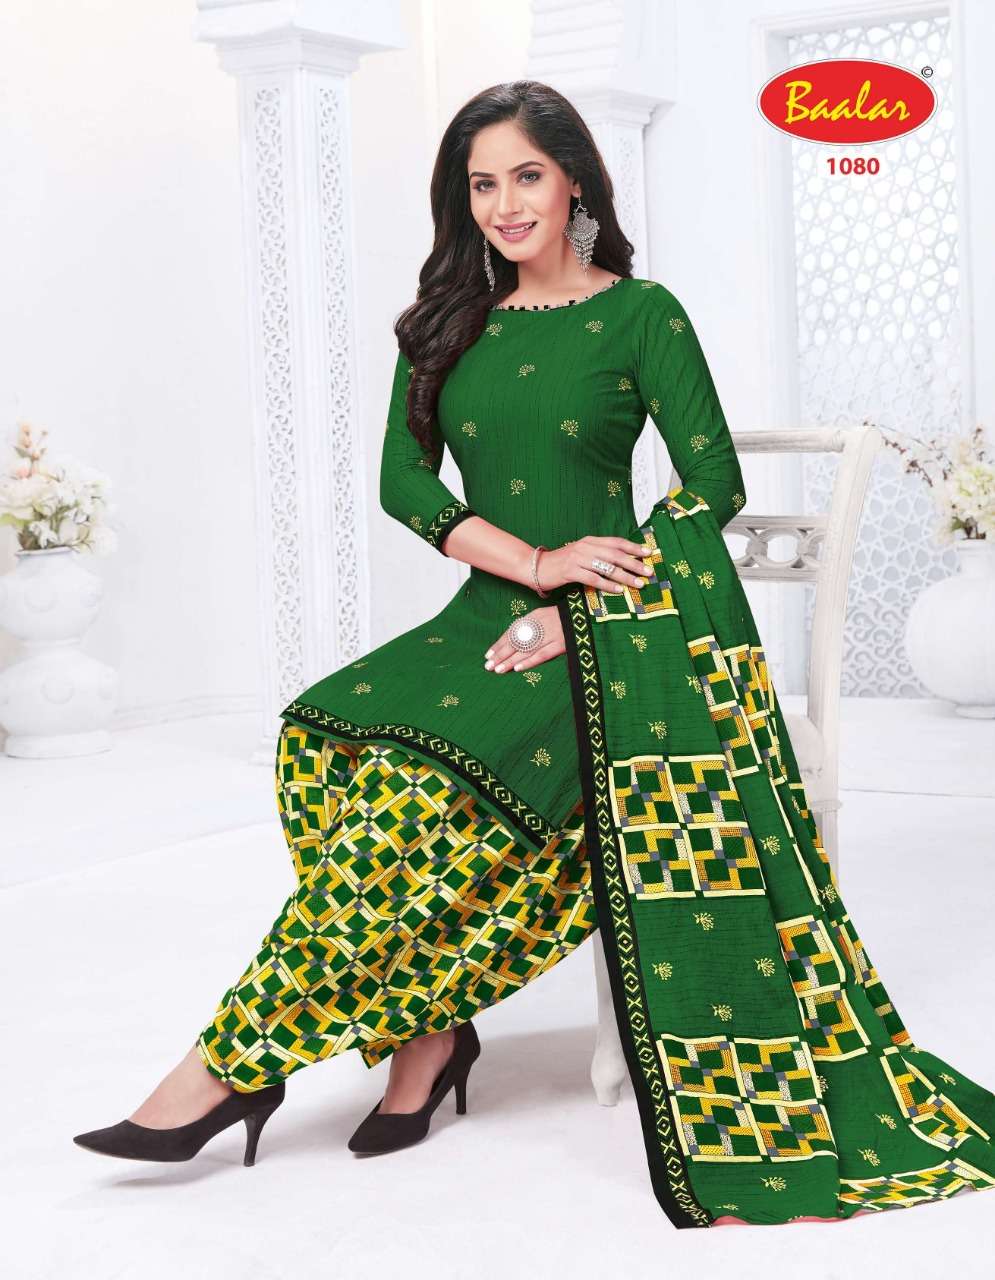 CRYSTAL PATIALA VOL-1 BY BAALAR 1071 TO 1085 SERIES BEAUTIFUL STYLISH SHARARA SUITS FANCY COLORFUL CASUAL WEAR & ETHNIC WEAR & READY TO WEAR PURE COTTON PRINTED DRESSES AT WHOLESALE PRICE